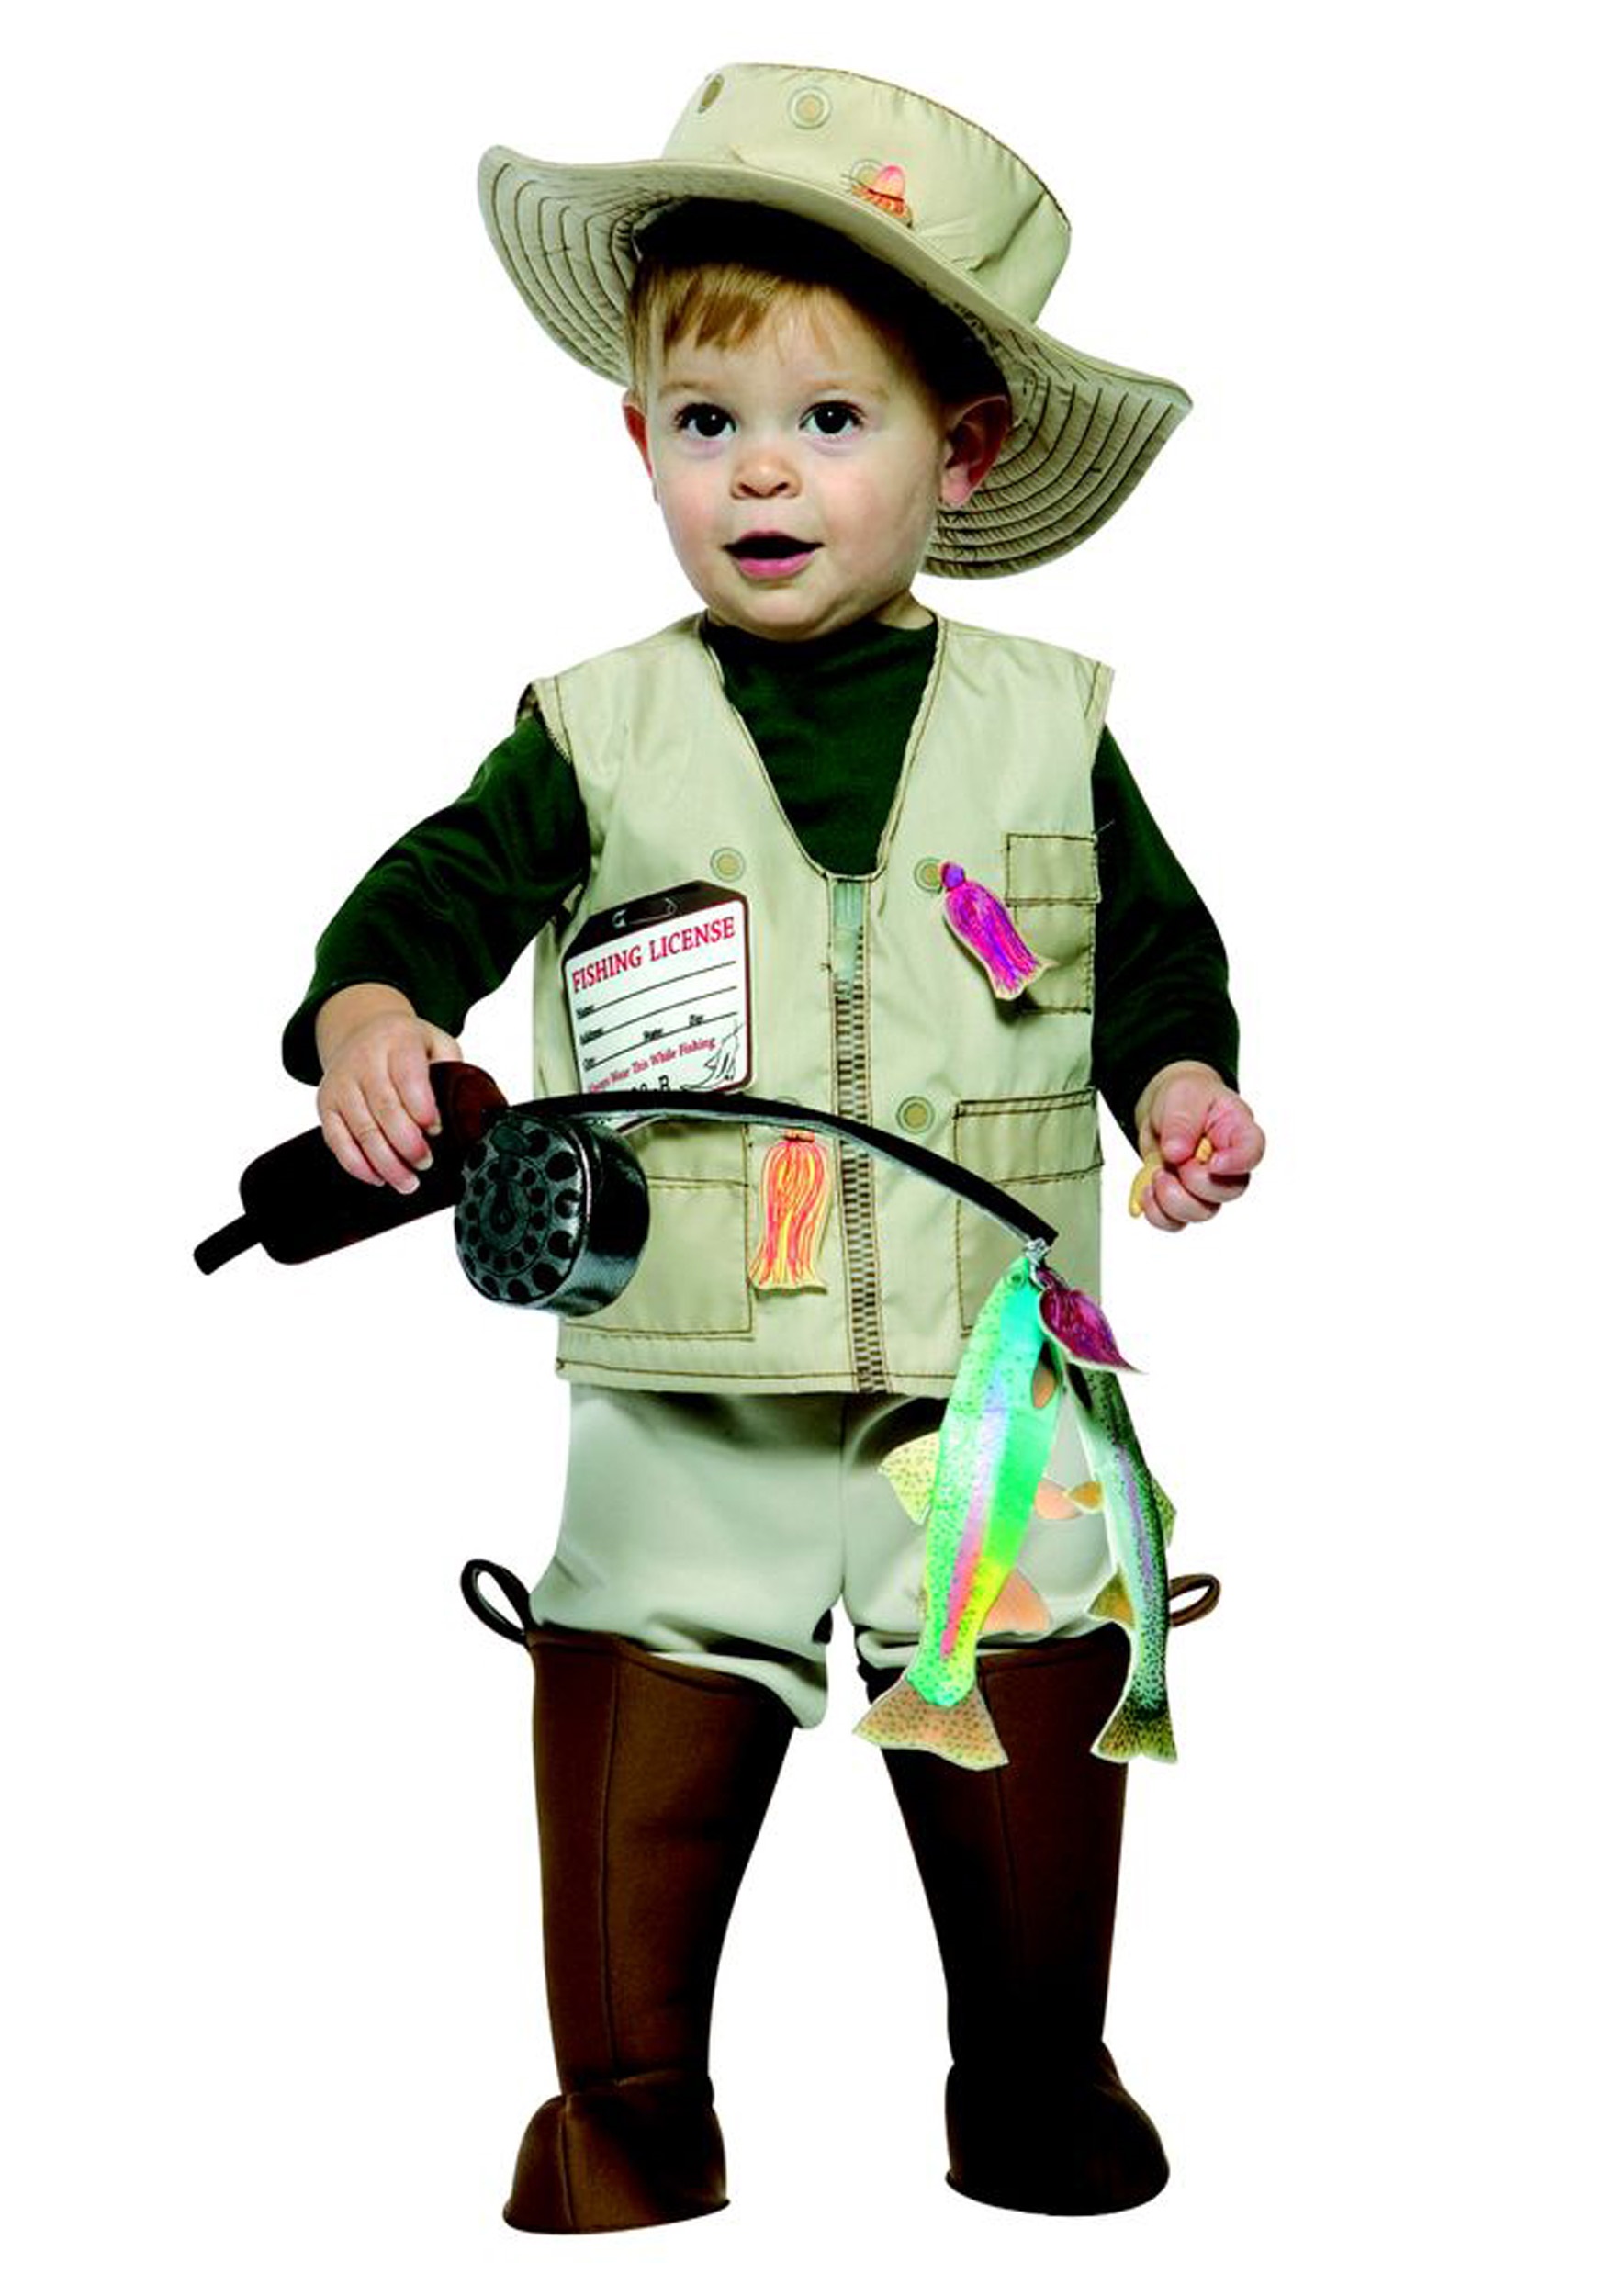 https://images.halloweencostumes.ca/products/15042/1-1/infant-toddler-future-fisherman-costume.jpg